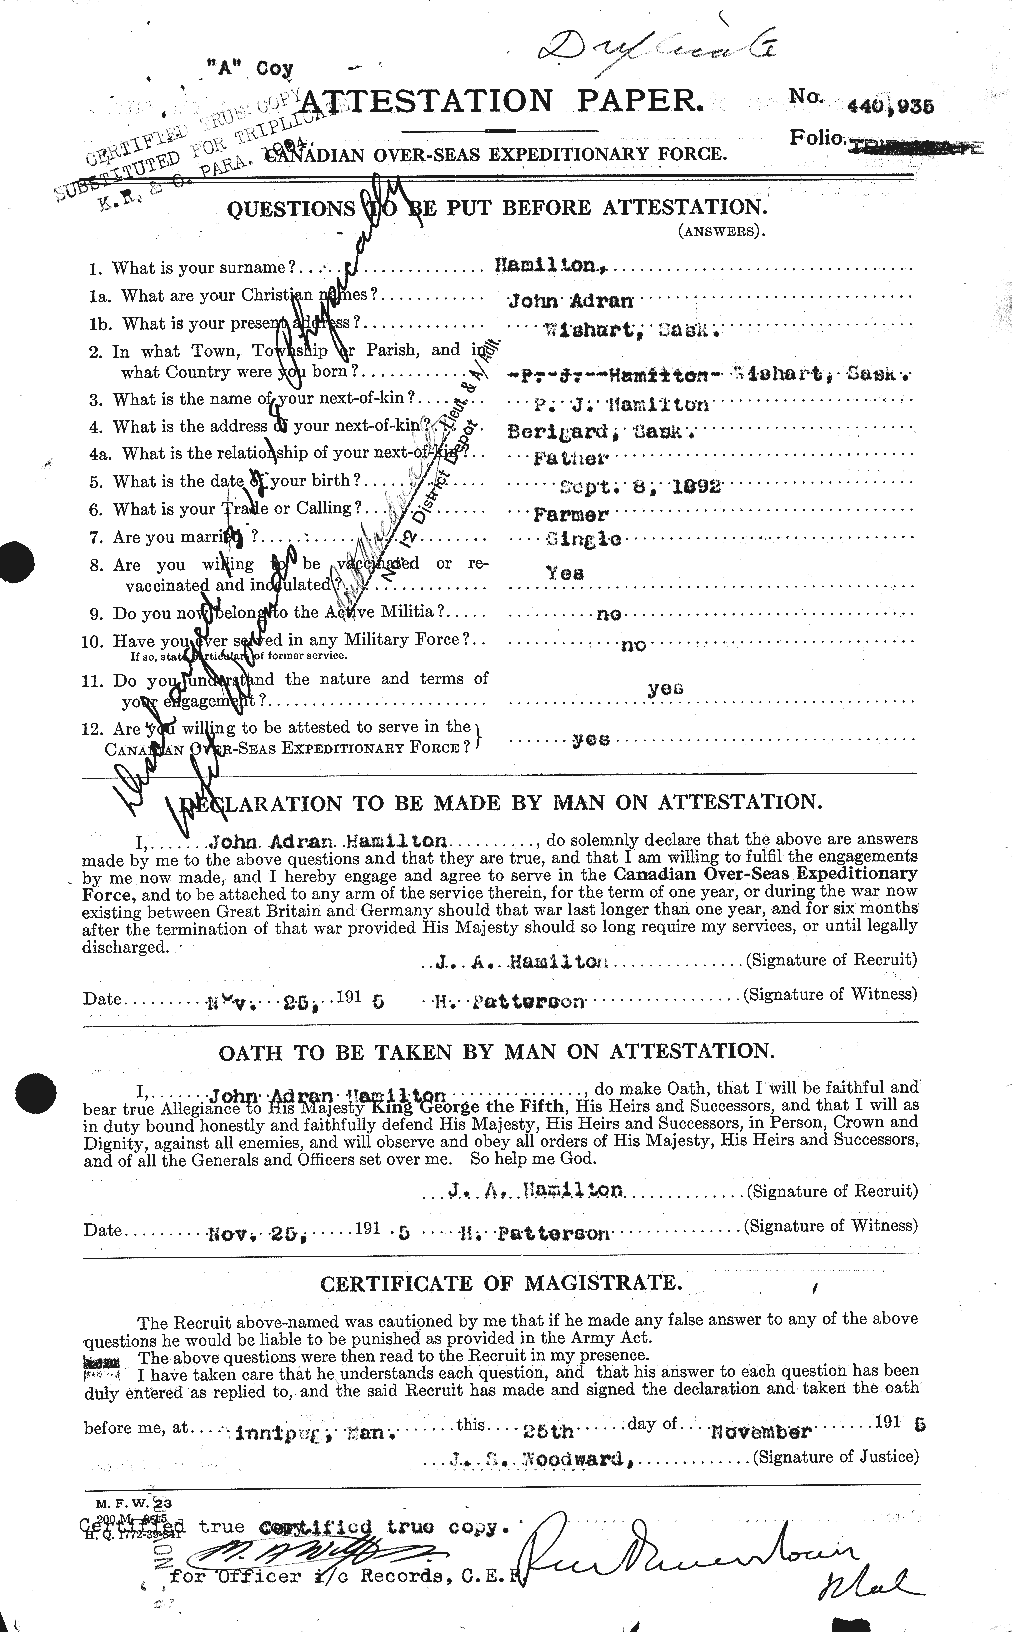 Personnel Records of the First World War - CEF 373062a